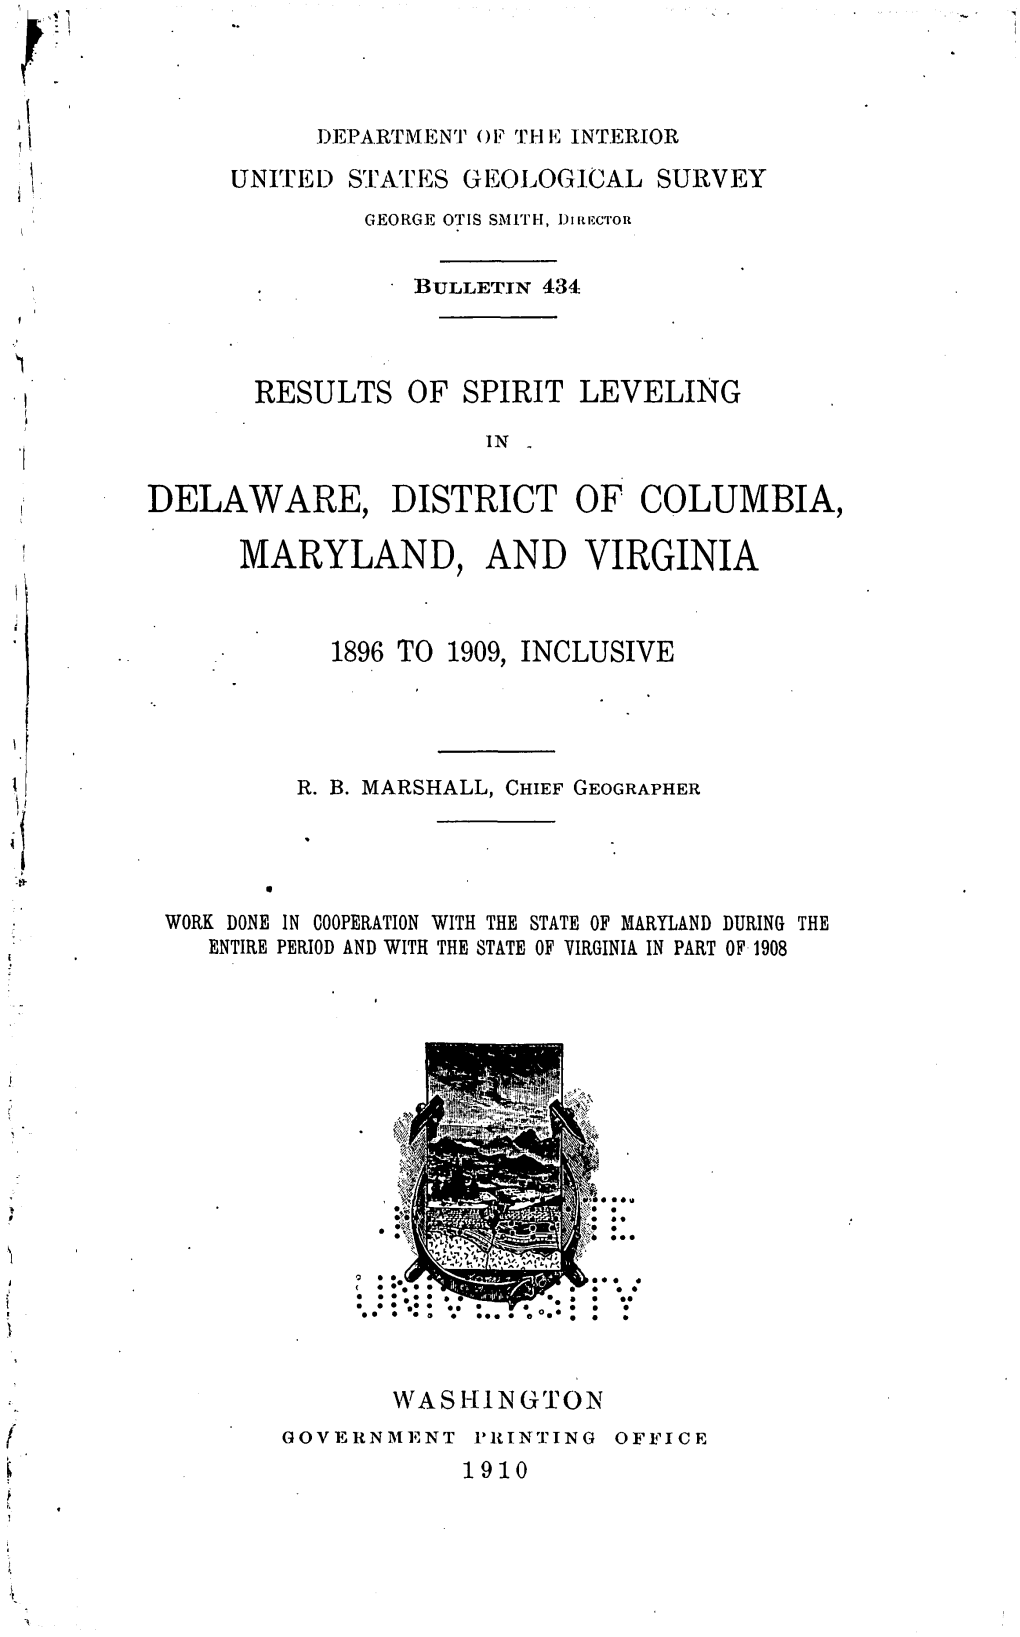 Delaware, District of Columbia, Maryland, and Virginia